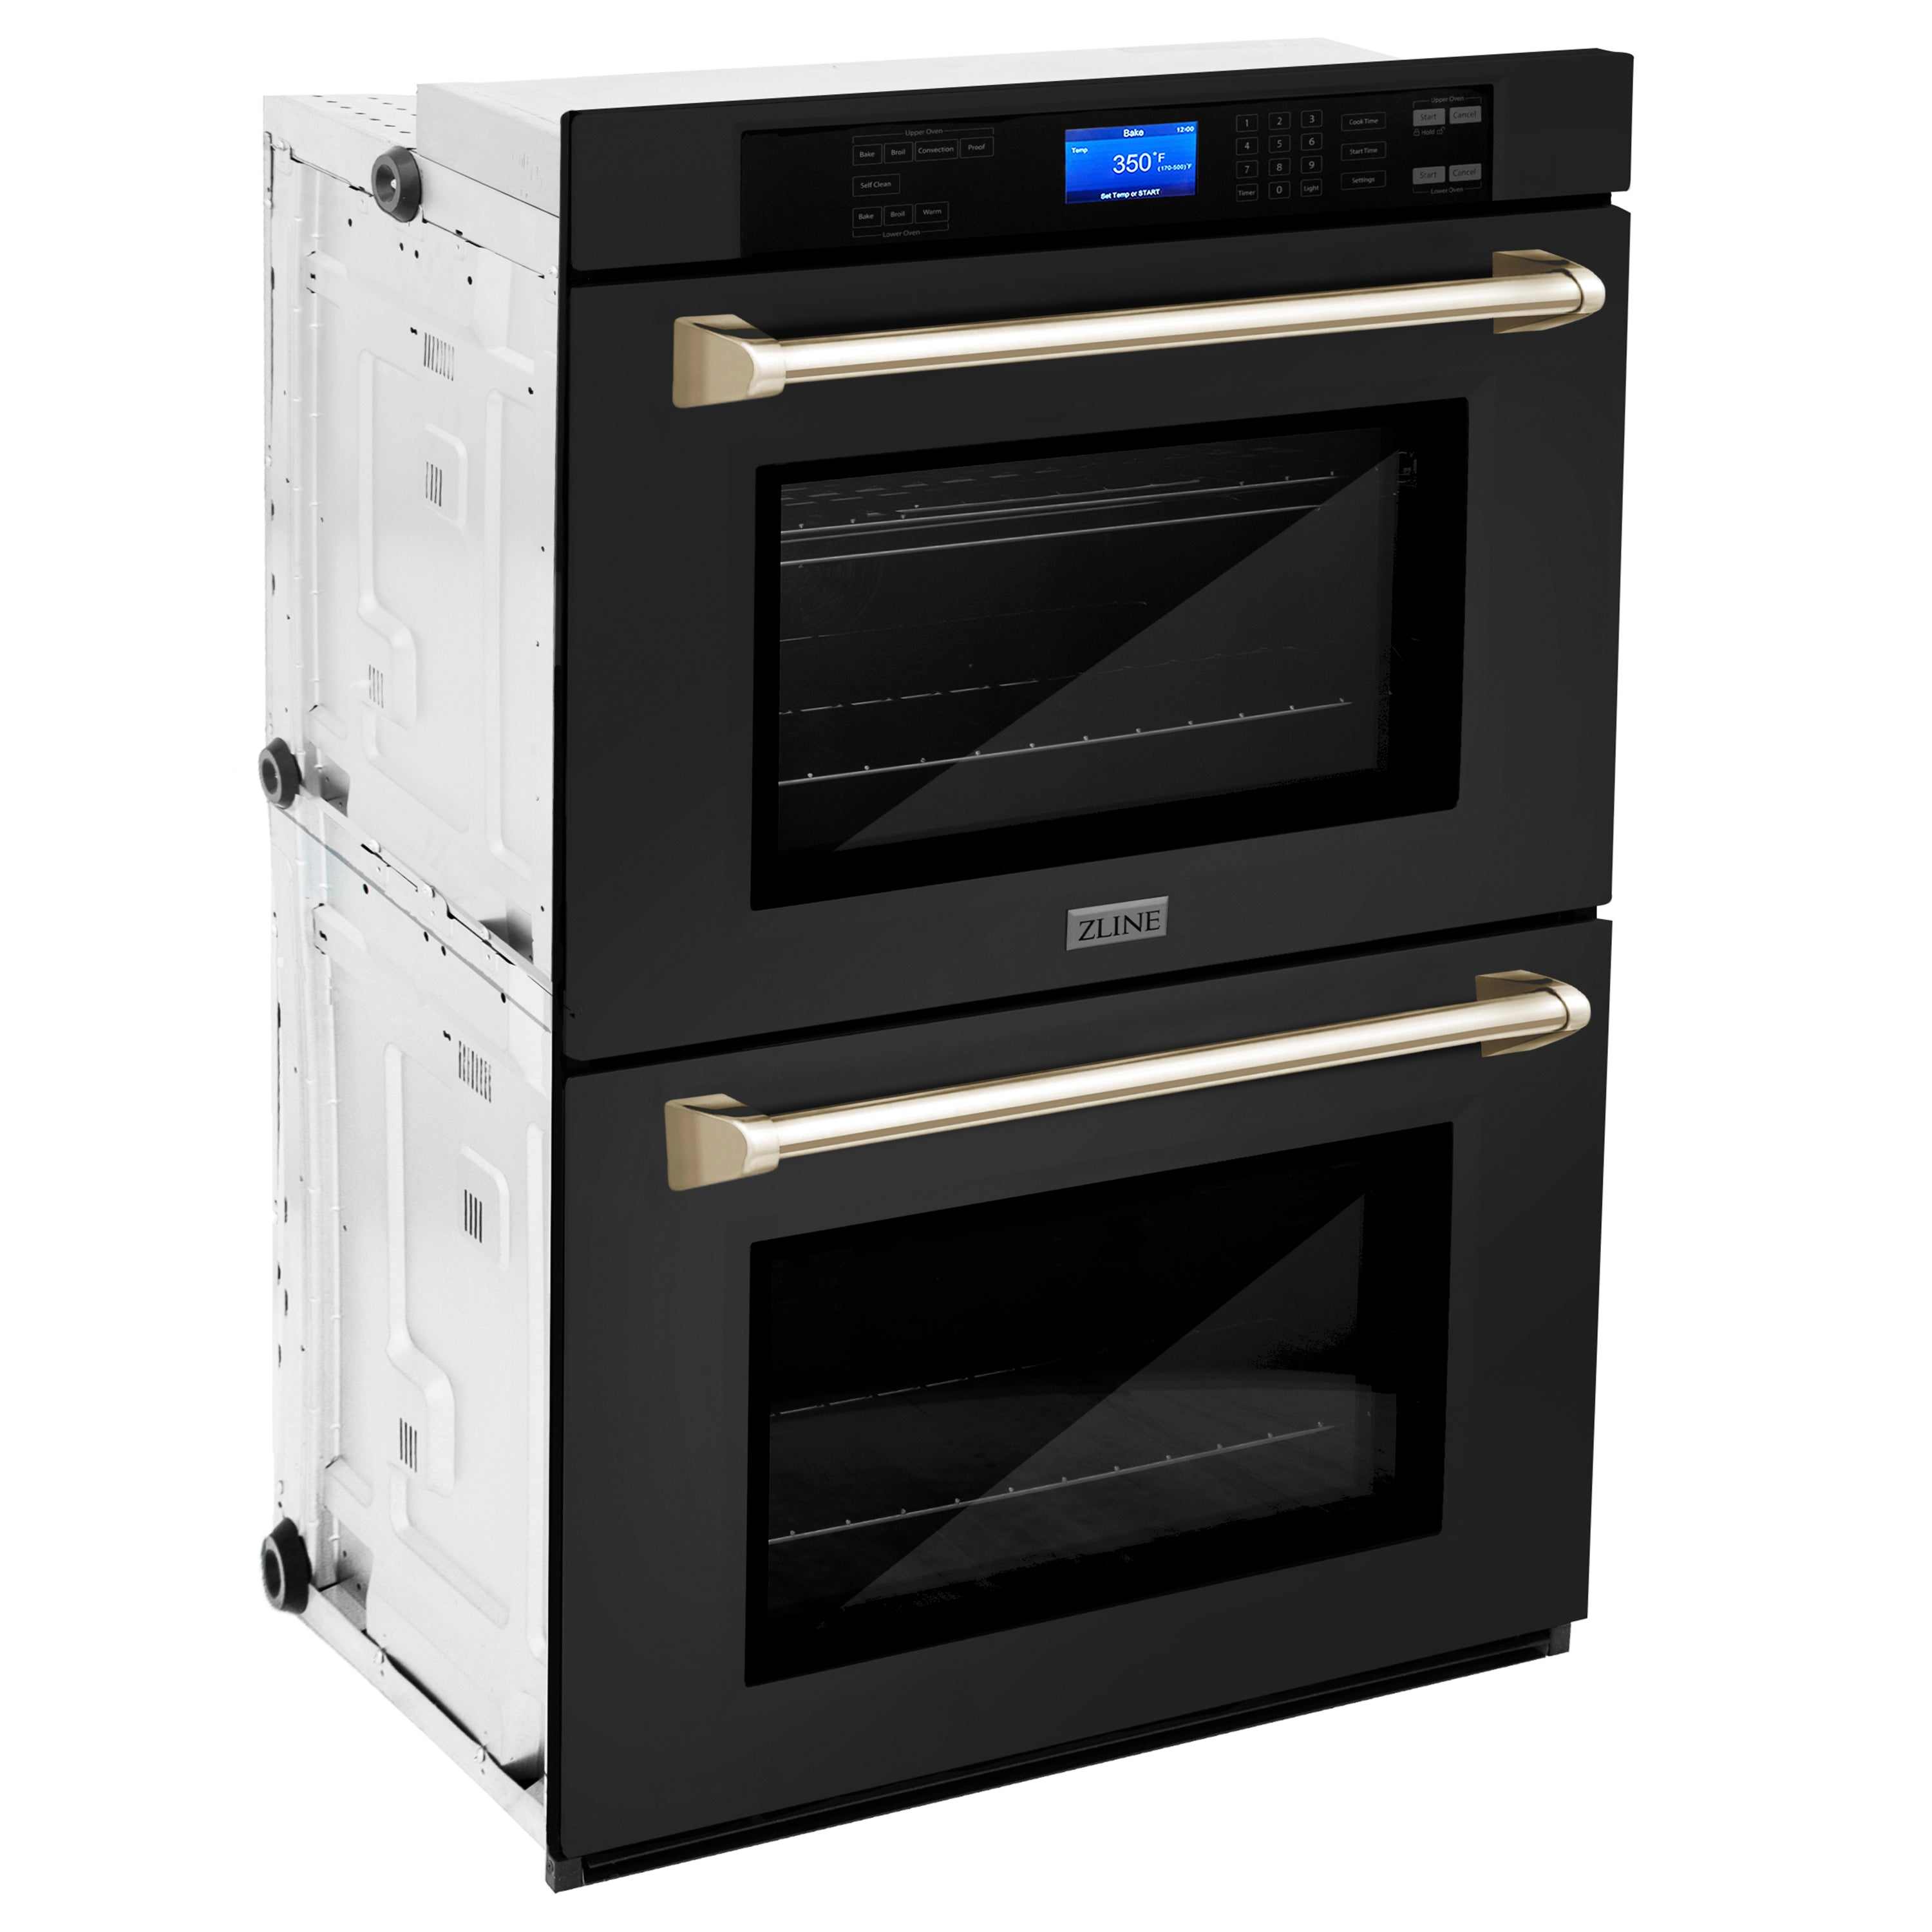 ZLINE 30" Autograph Edition Double Wall Oven with Self Clean and True Convection in Black Stainless Steel and Gold (AWDZ-30-BS-G)